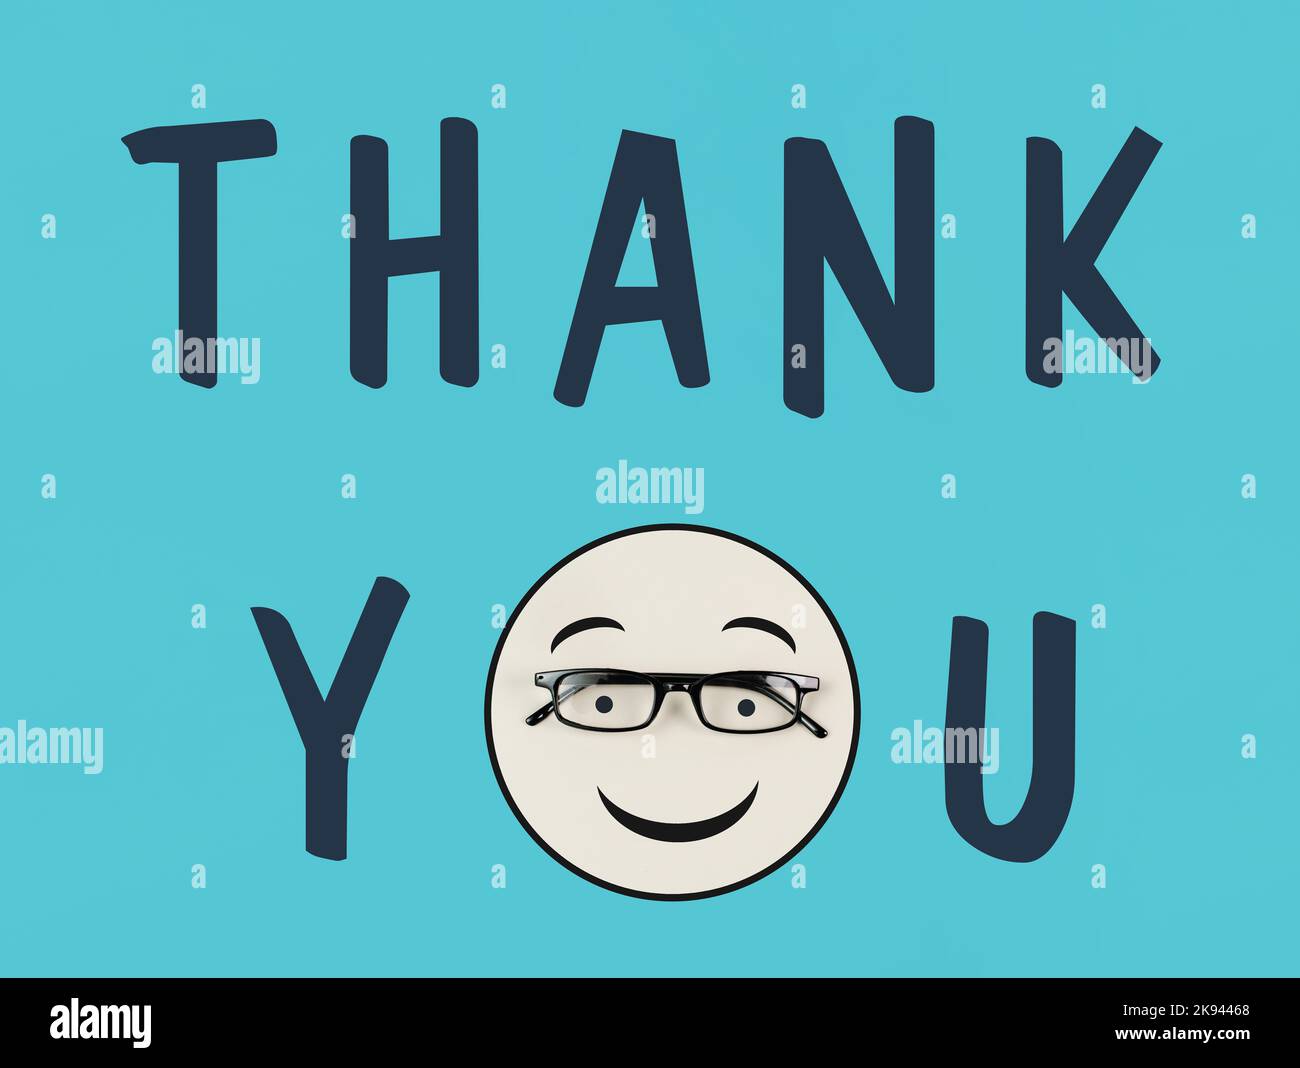 Thank you with a smiling friendly face, being thankful, communication concept Stock Photo